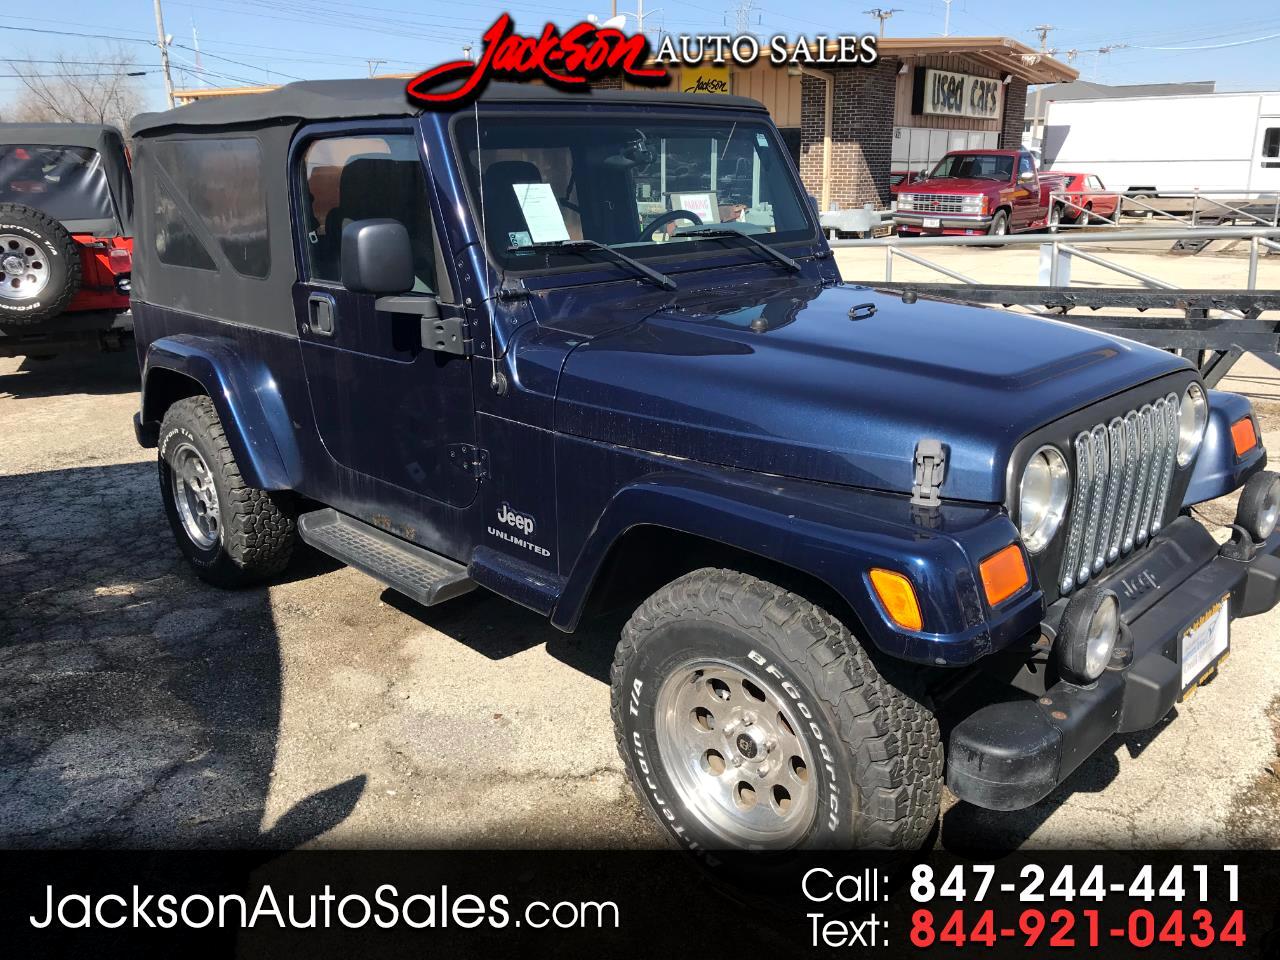 Used Jeep Wrangler Unlimited For Sale in Brookfield, WI from $499 to  $3,980,000